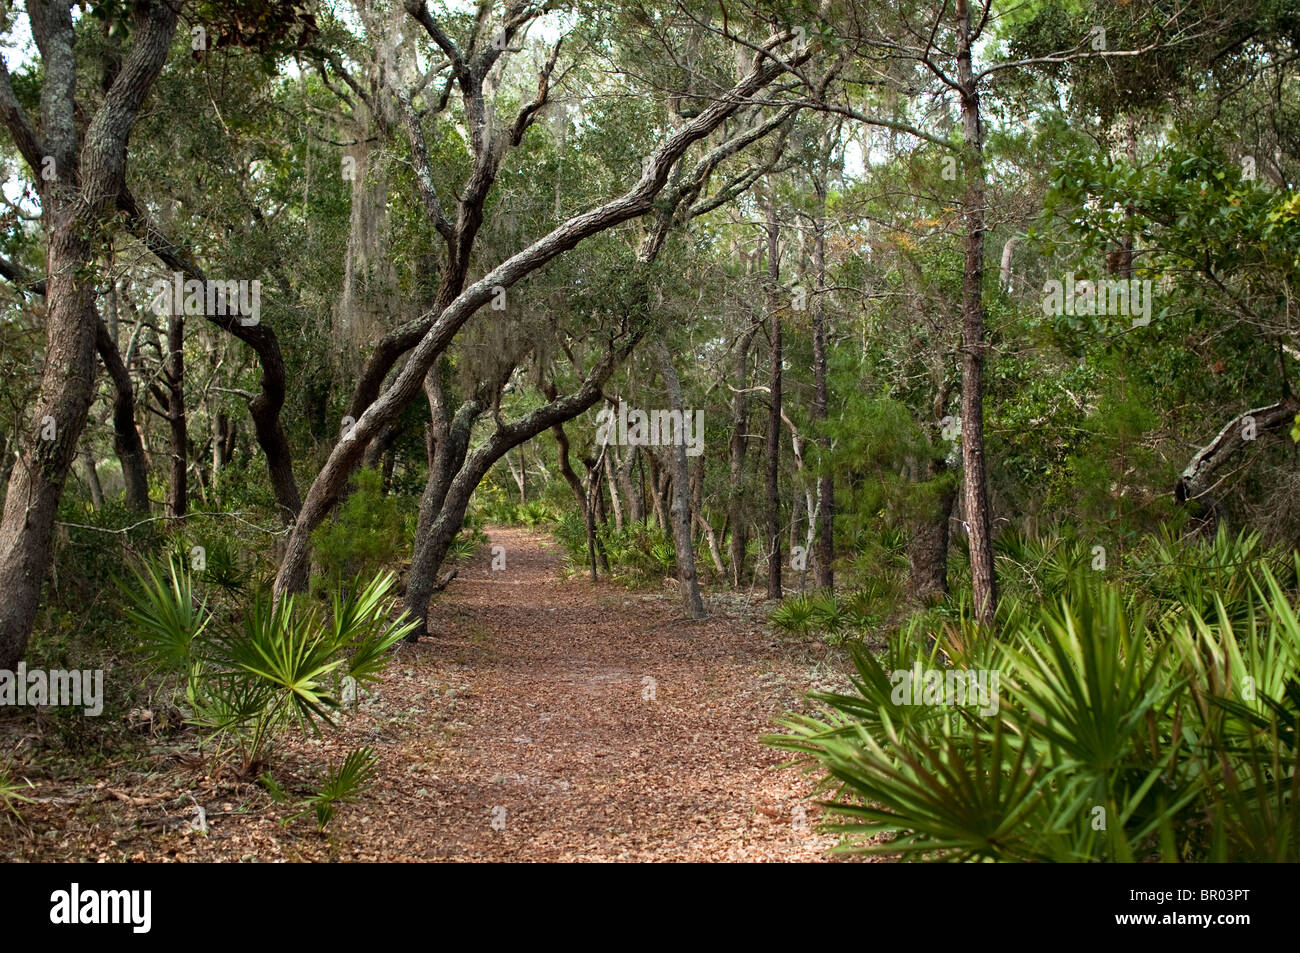 Path in a Florida State Park lined with Palmetto, Myrtle trees, and Spanish Moss. Stock Photo